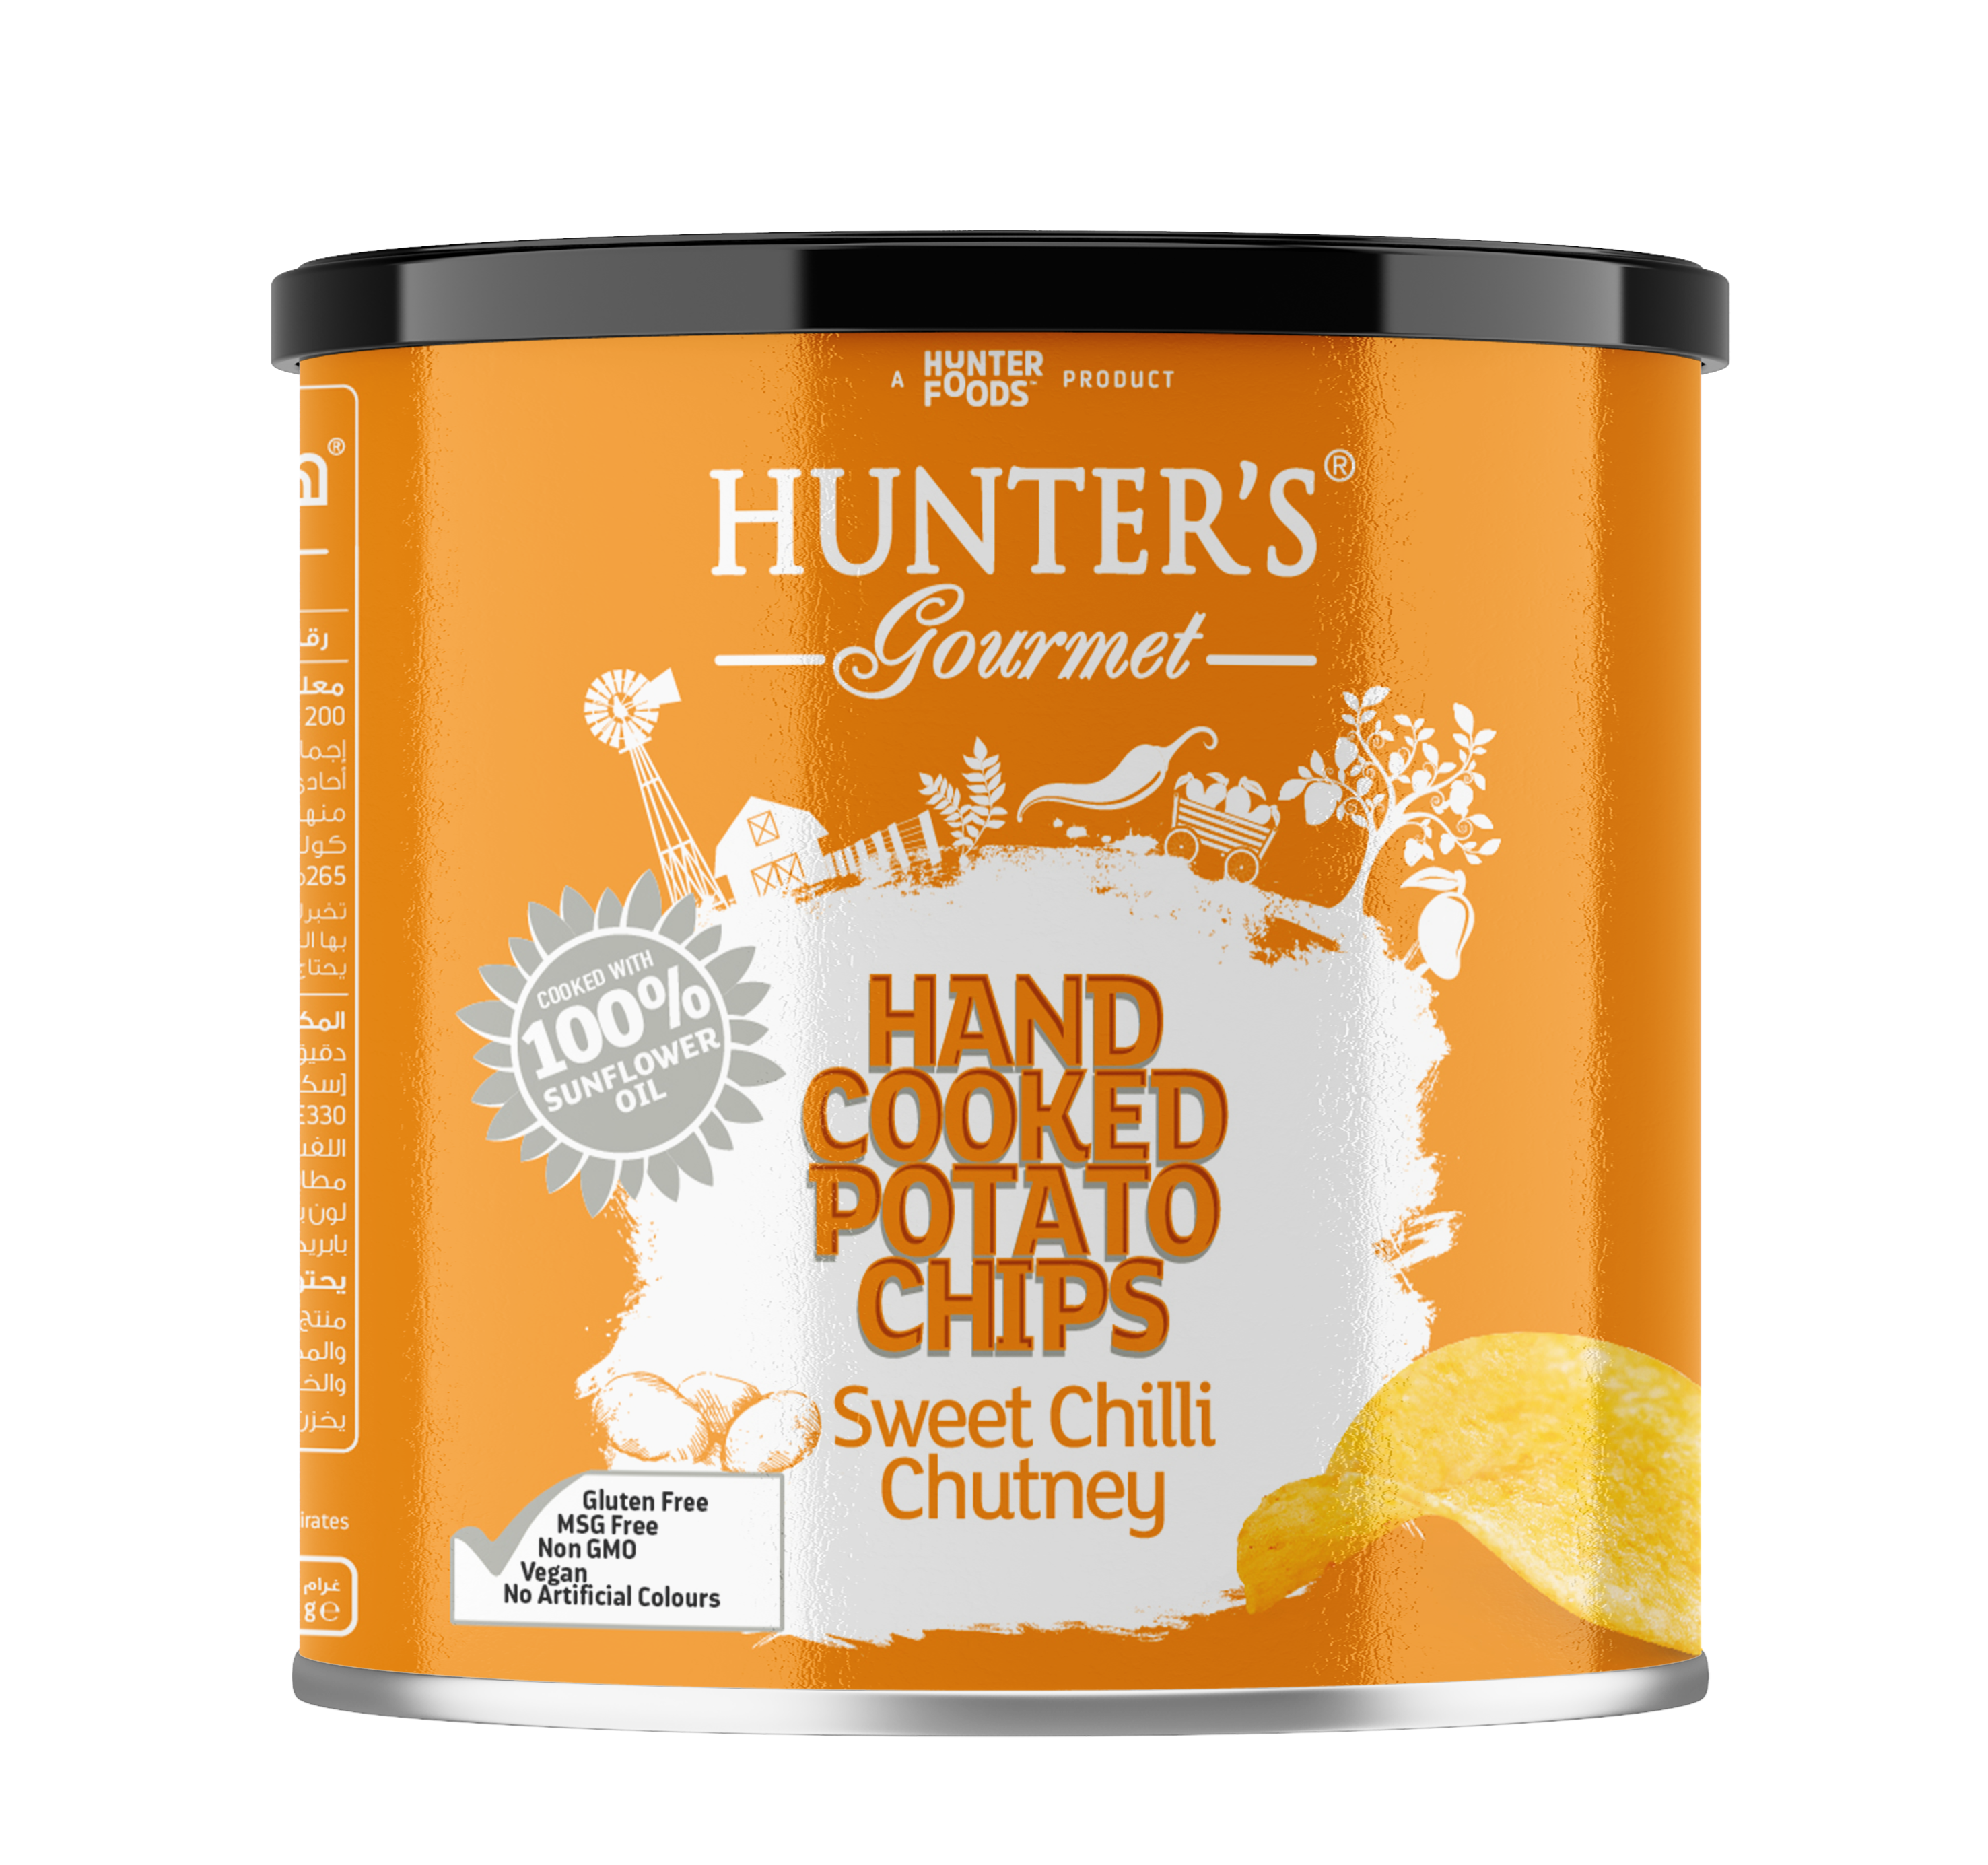 Hunter's Gourmet Hand Cooked Potato Chips Sweet Chilli Chutney 50 units per case 40 g